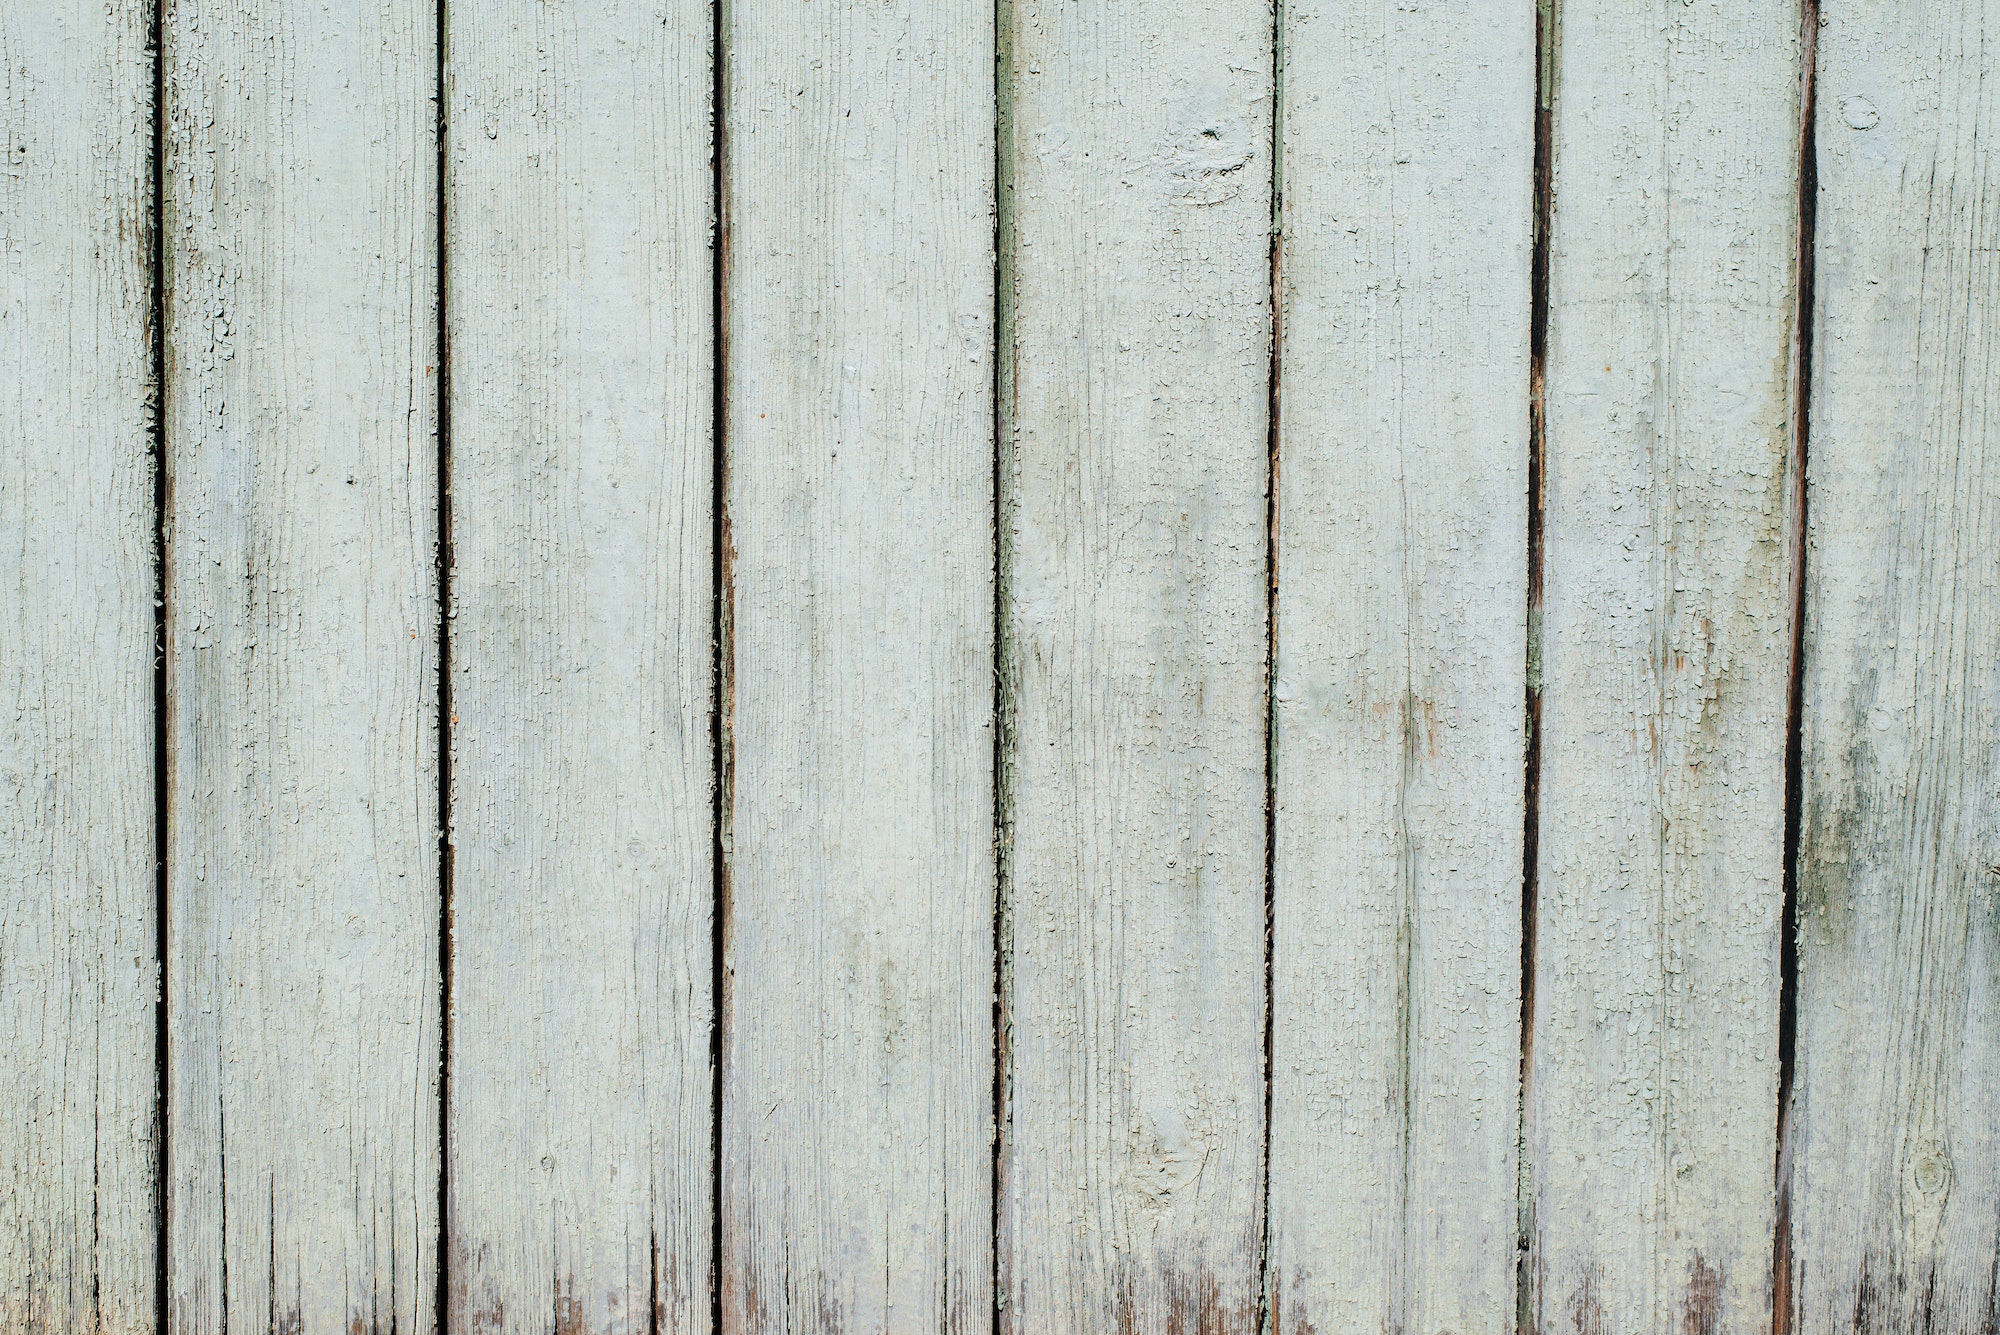 Wooden fence with green old paint, vertical boards, texture background exterior